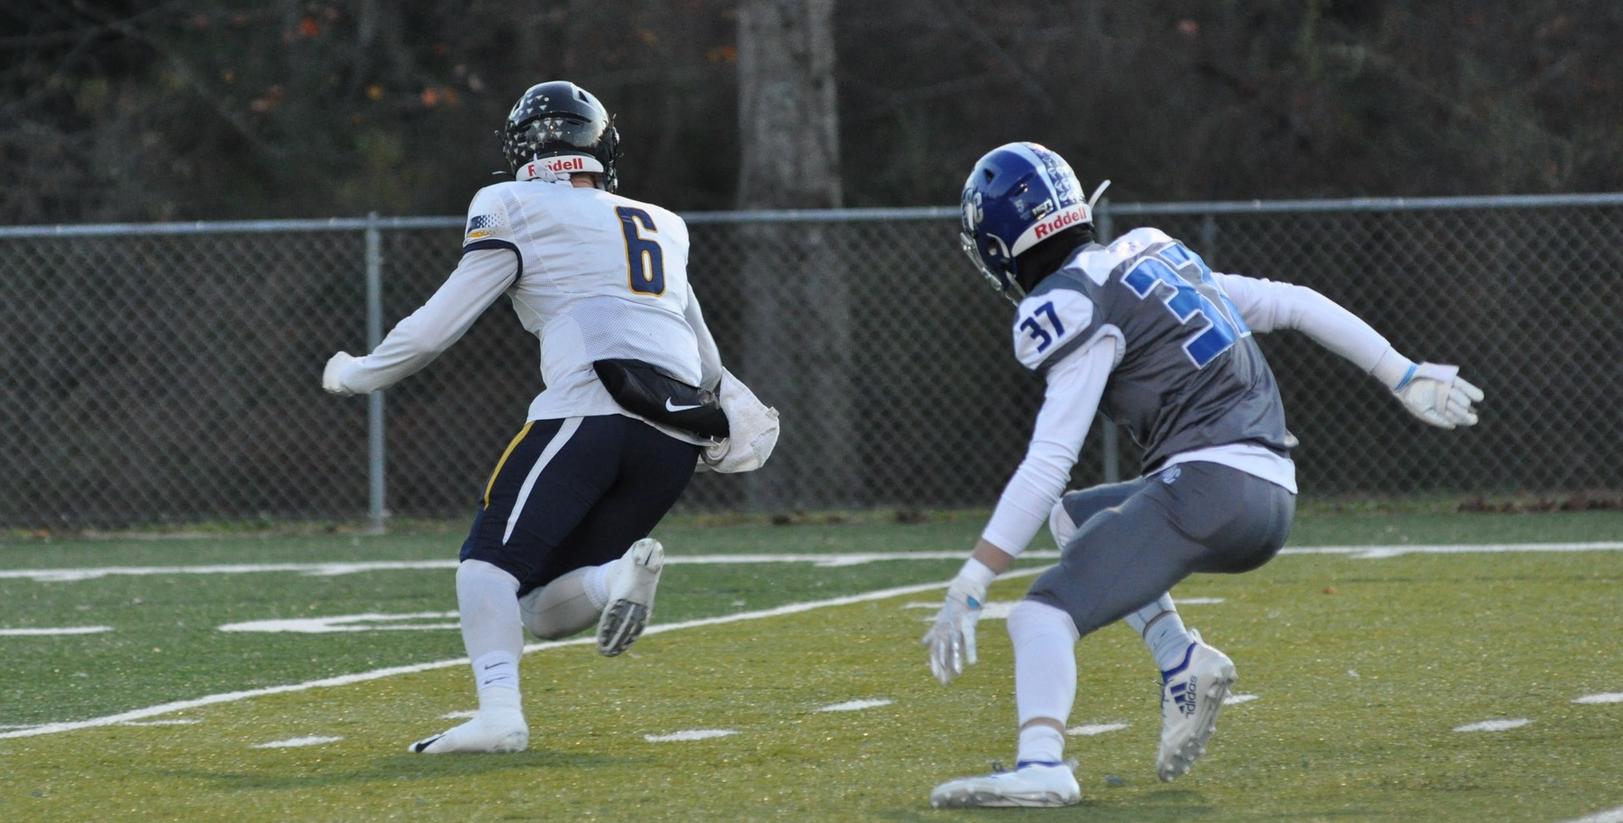 Brevard College junior defensive back Wesley Ross chases down Averett quarterback Jacob Wright. Ross sealed BC's hard-fought 10-9 victory with a last-second interception on Averett's final drive (Courtesy of Tommy Moss).